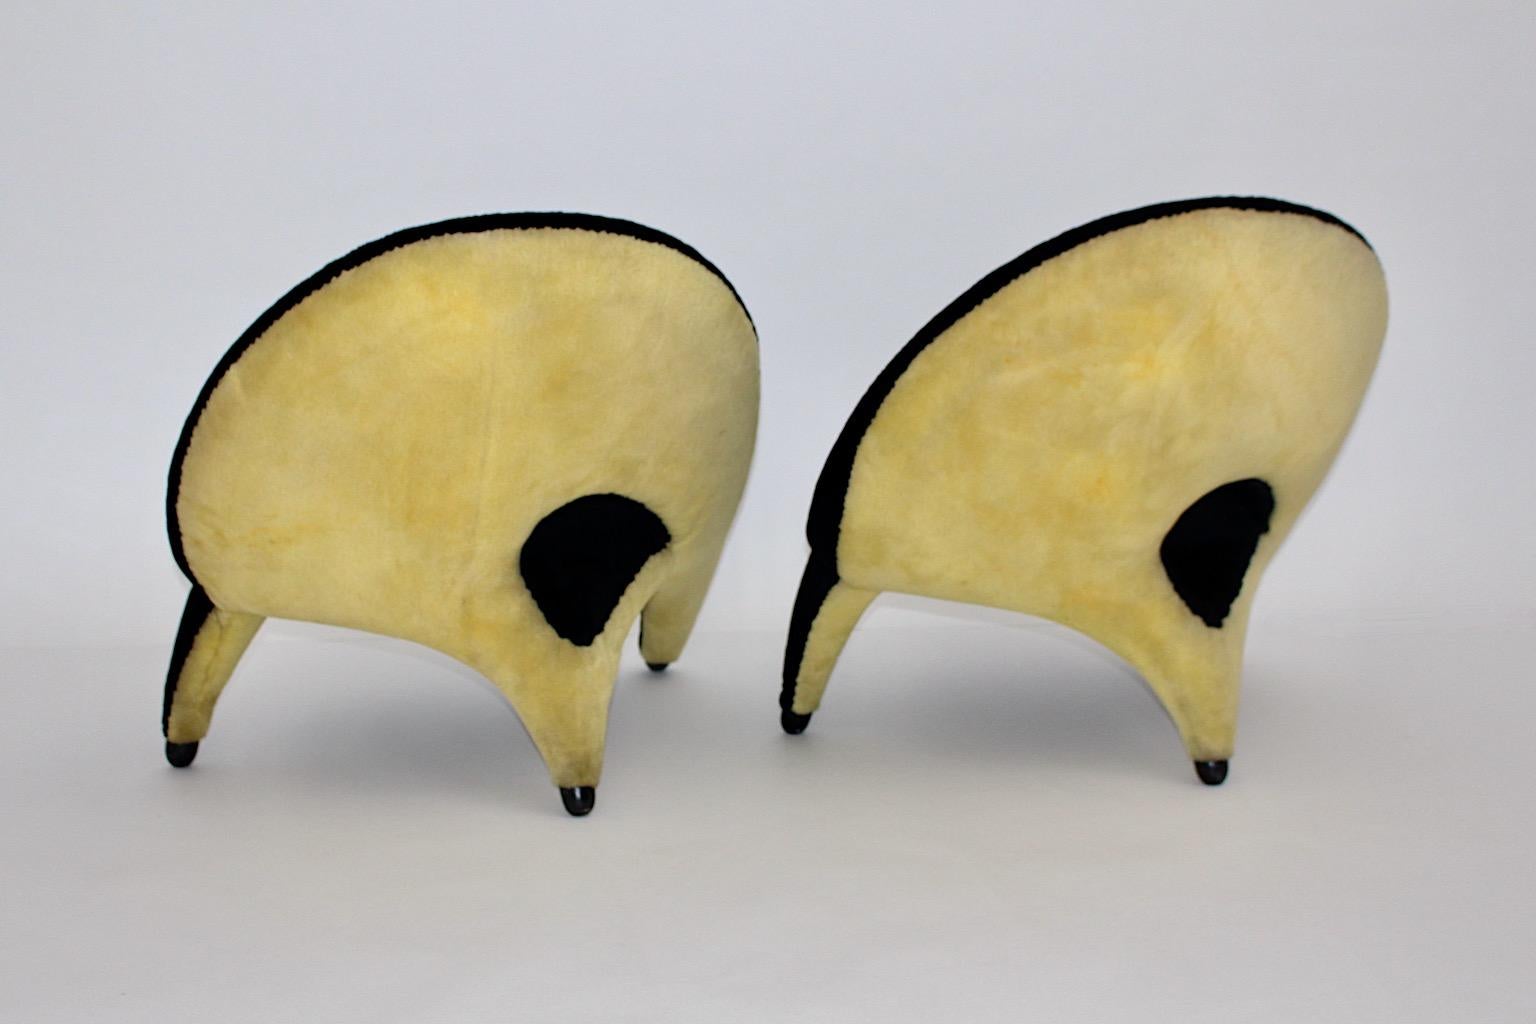 Mid-Century Modern vintage authentic pair of lounge chairs or club chairs by Folke Jansson for SM Wincrantz from black yellow fabric, 1955, Sweden in beautiful organic shape.
A gorgeous pair of lounge chairs or club chairs from fluffy plushy